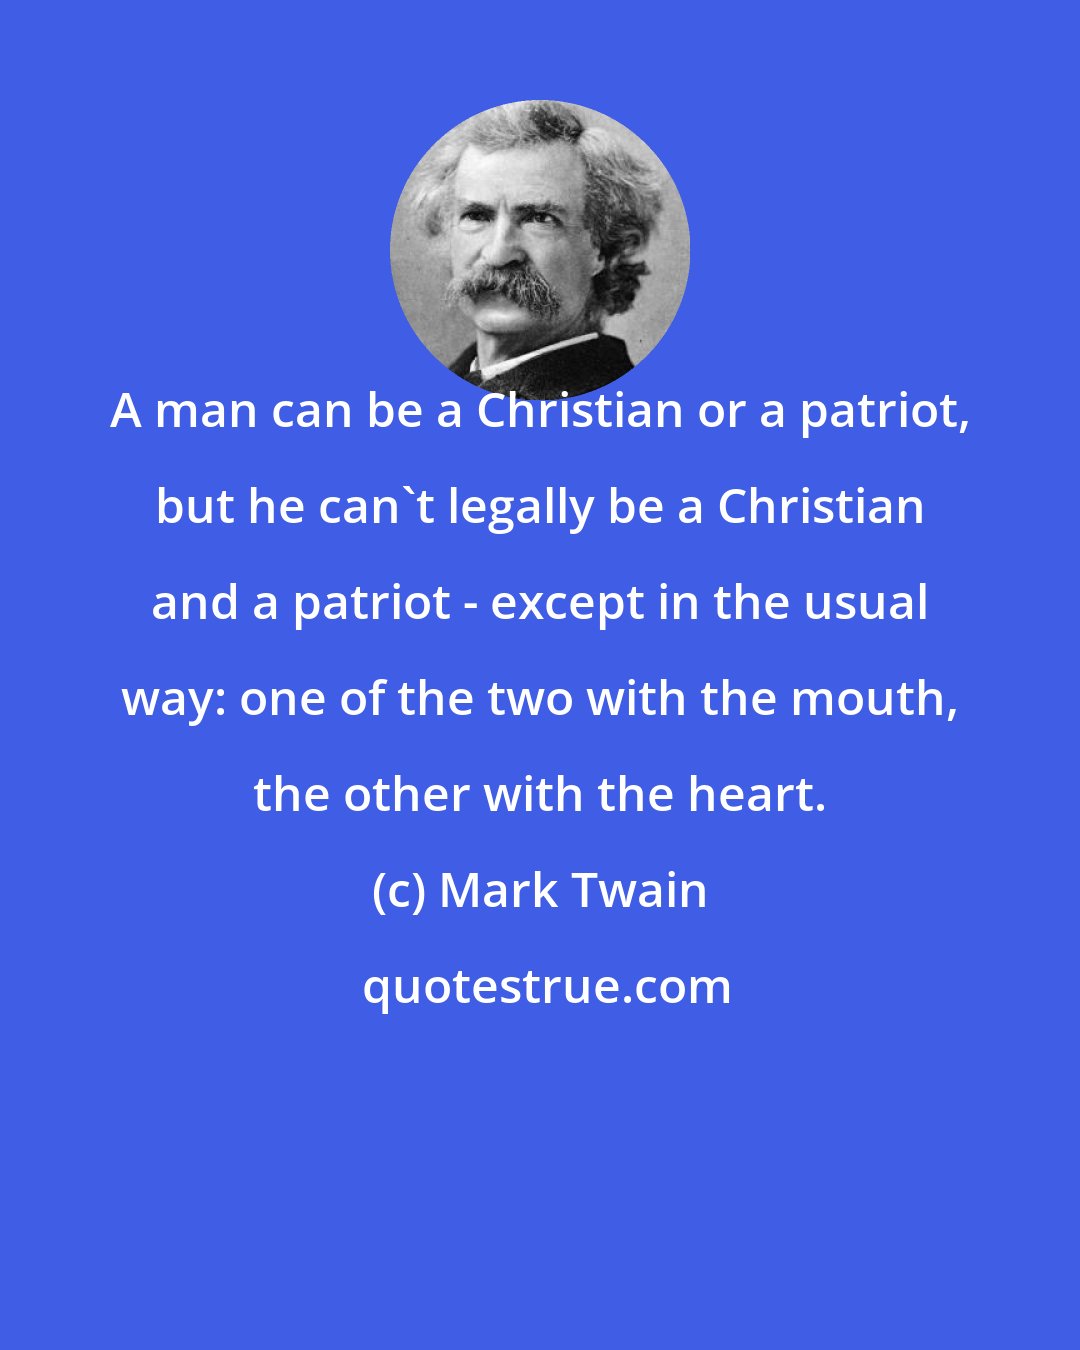 Mark Twain: A man can be a Christian or a patriot, but he can't legally be a Christian and a patriot - except in the usual way: one of the two with the mouth, the other with the heart.